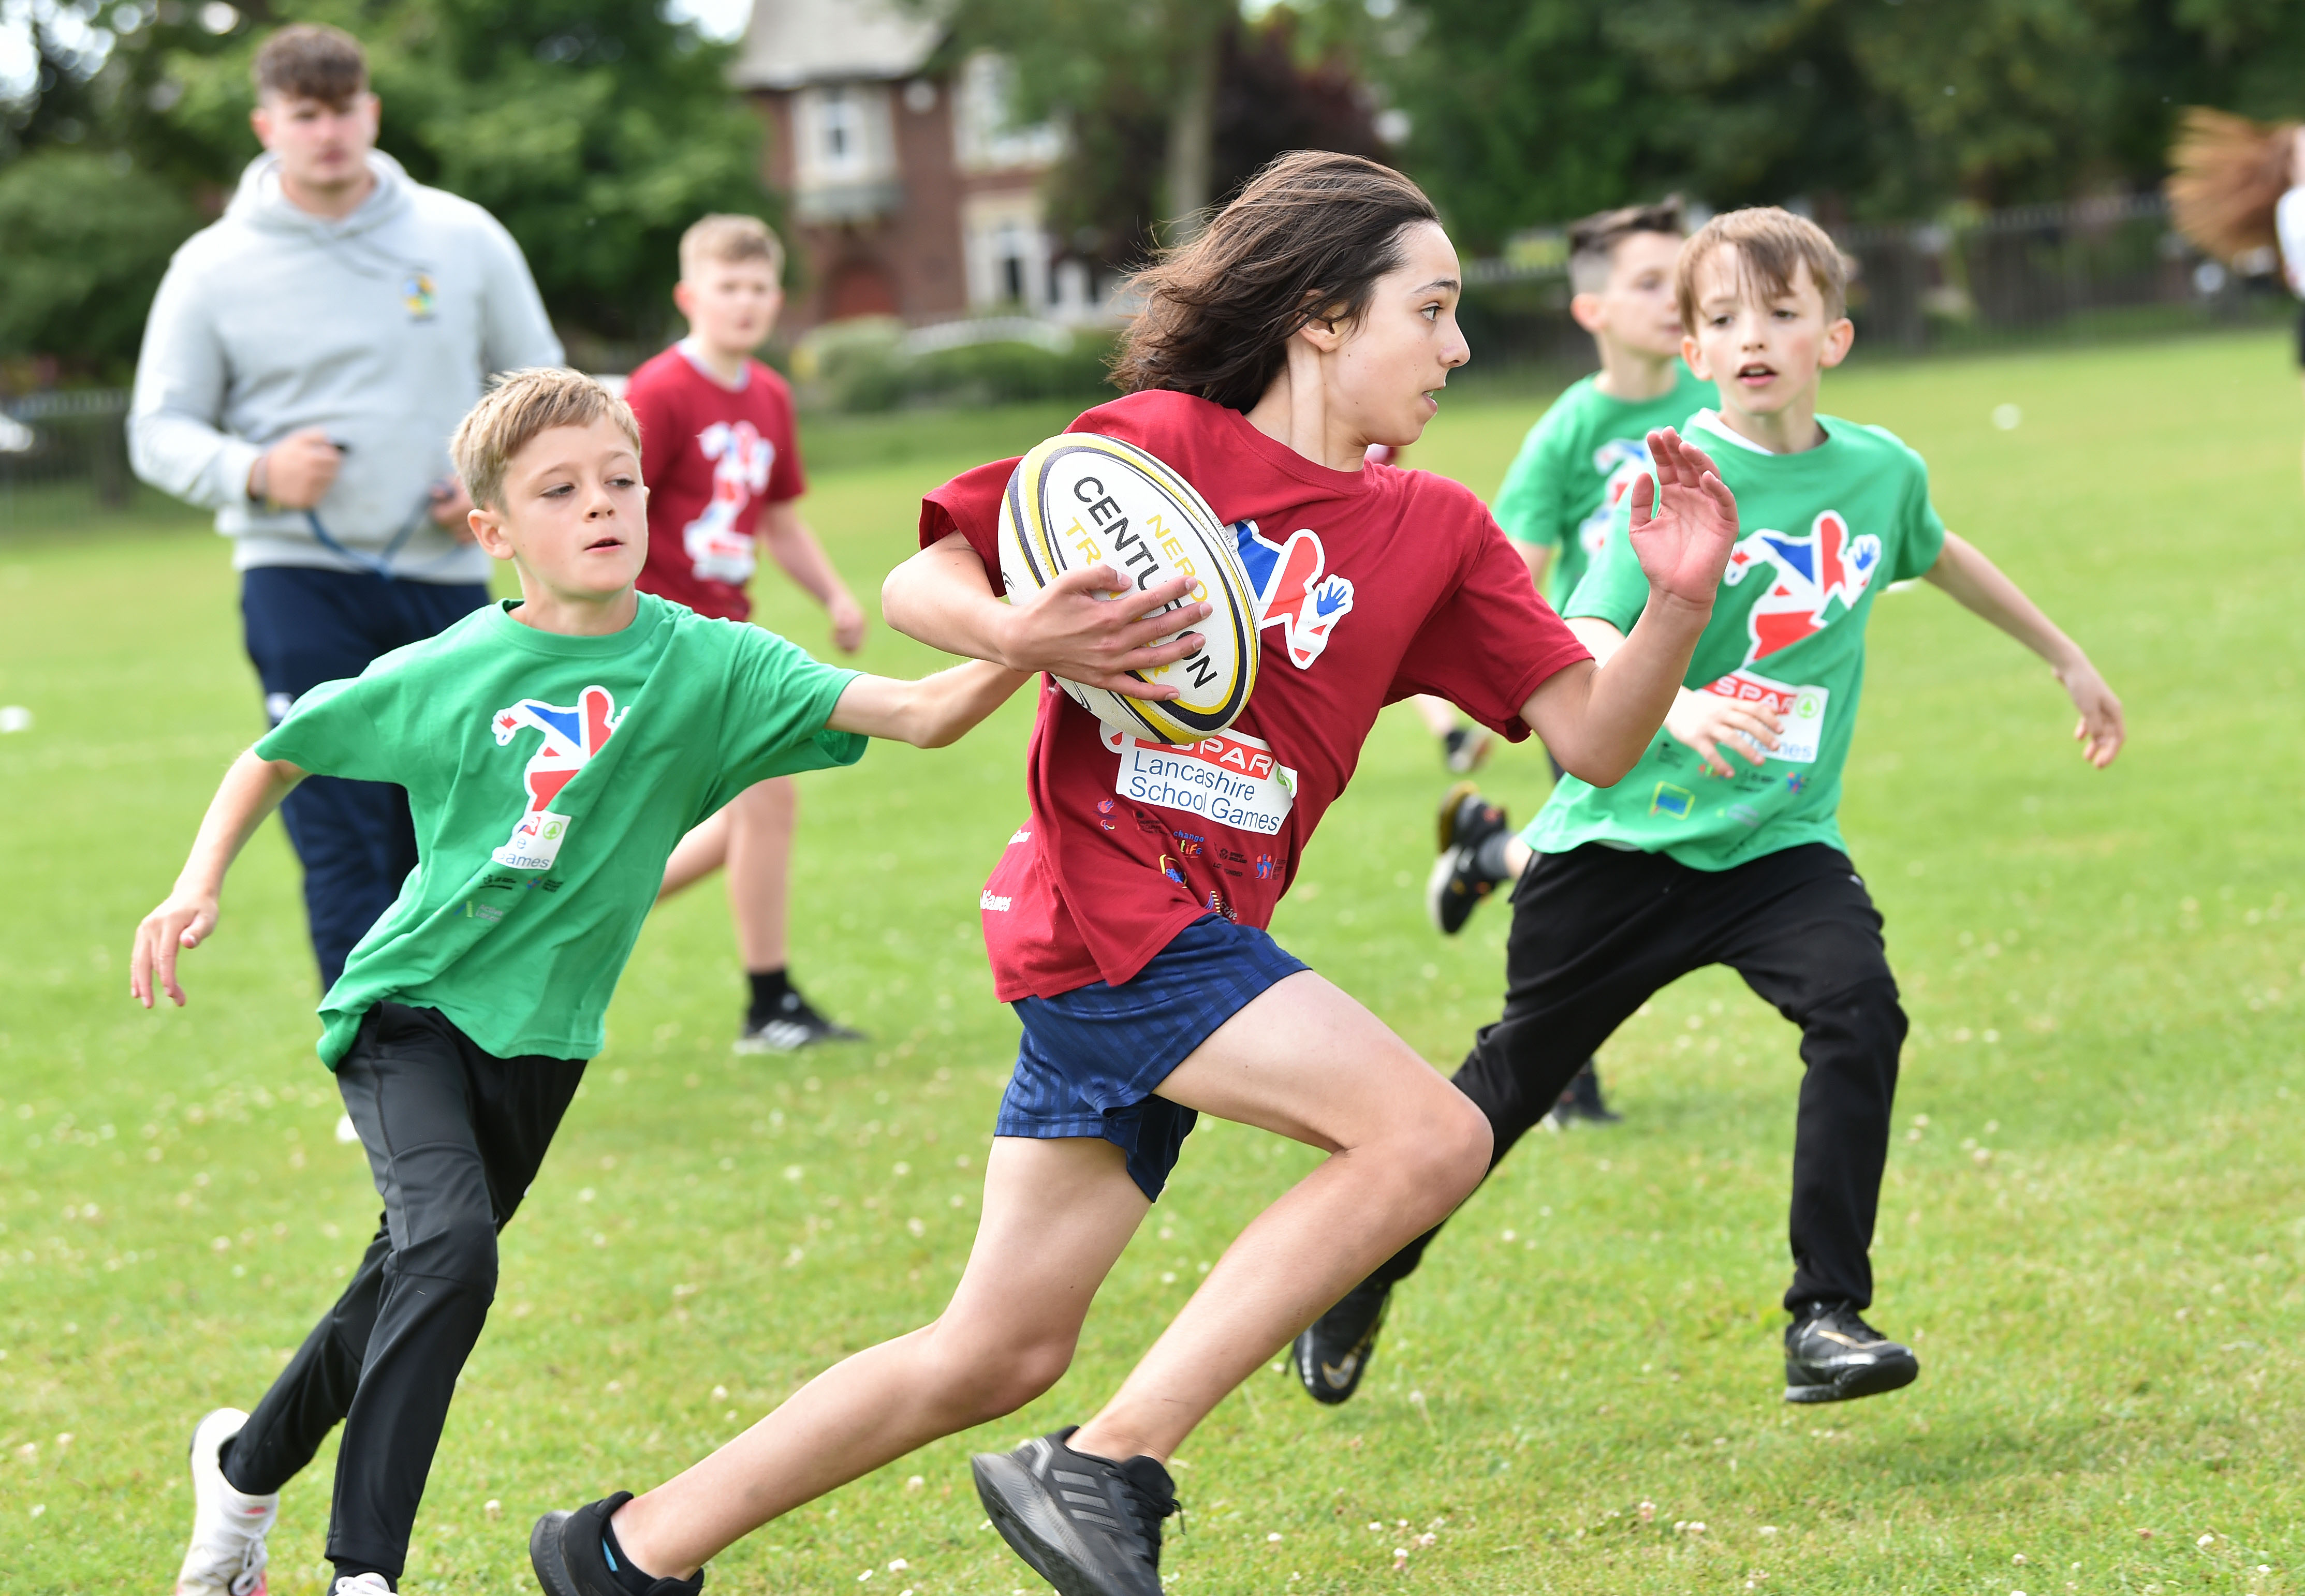 Lancashire School Games - West Lancs and Pendle tag rugby